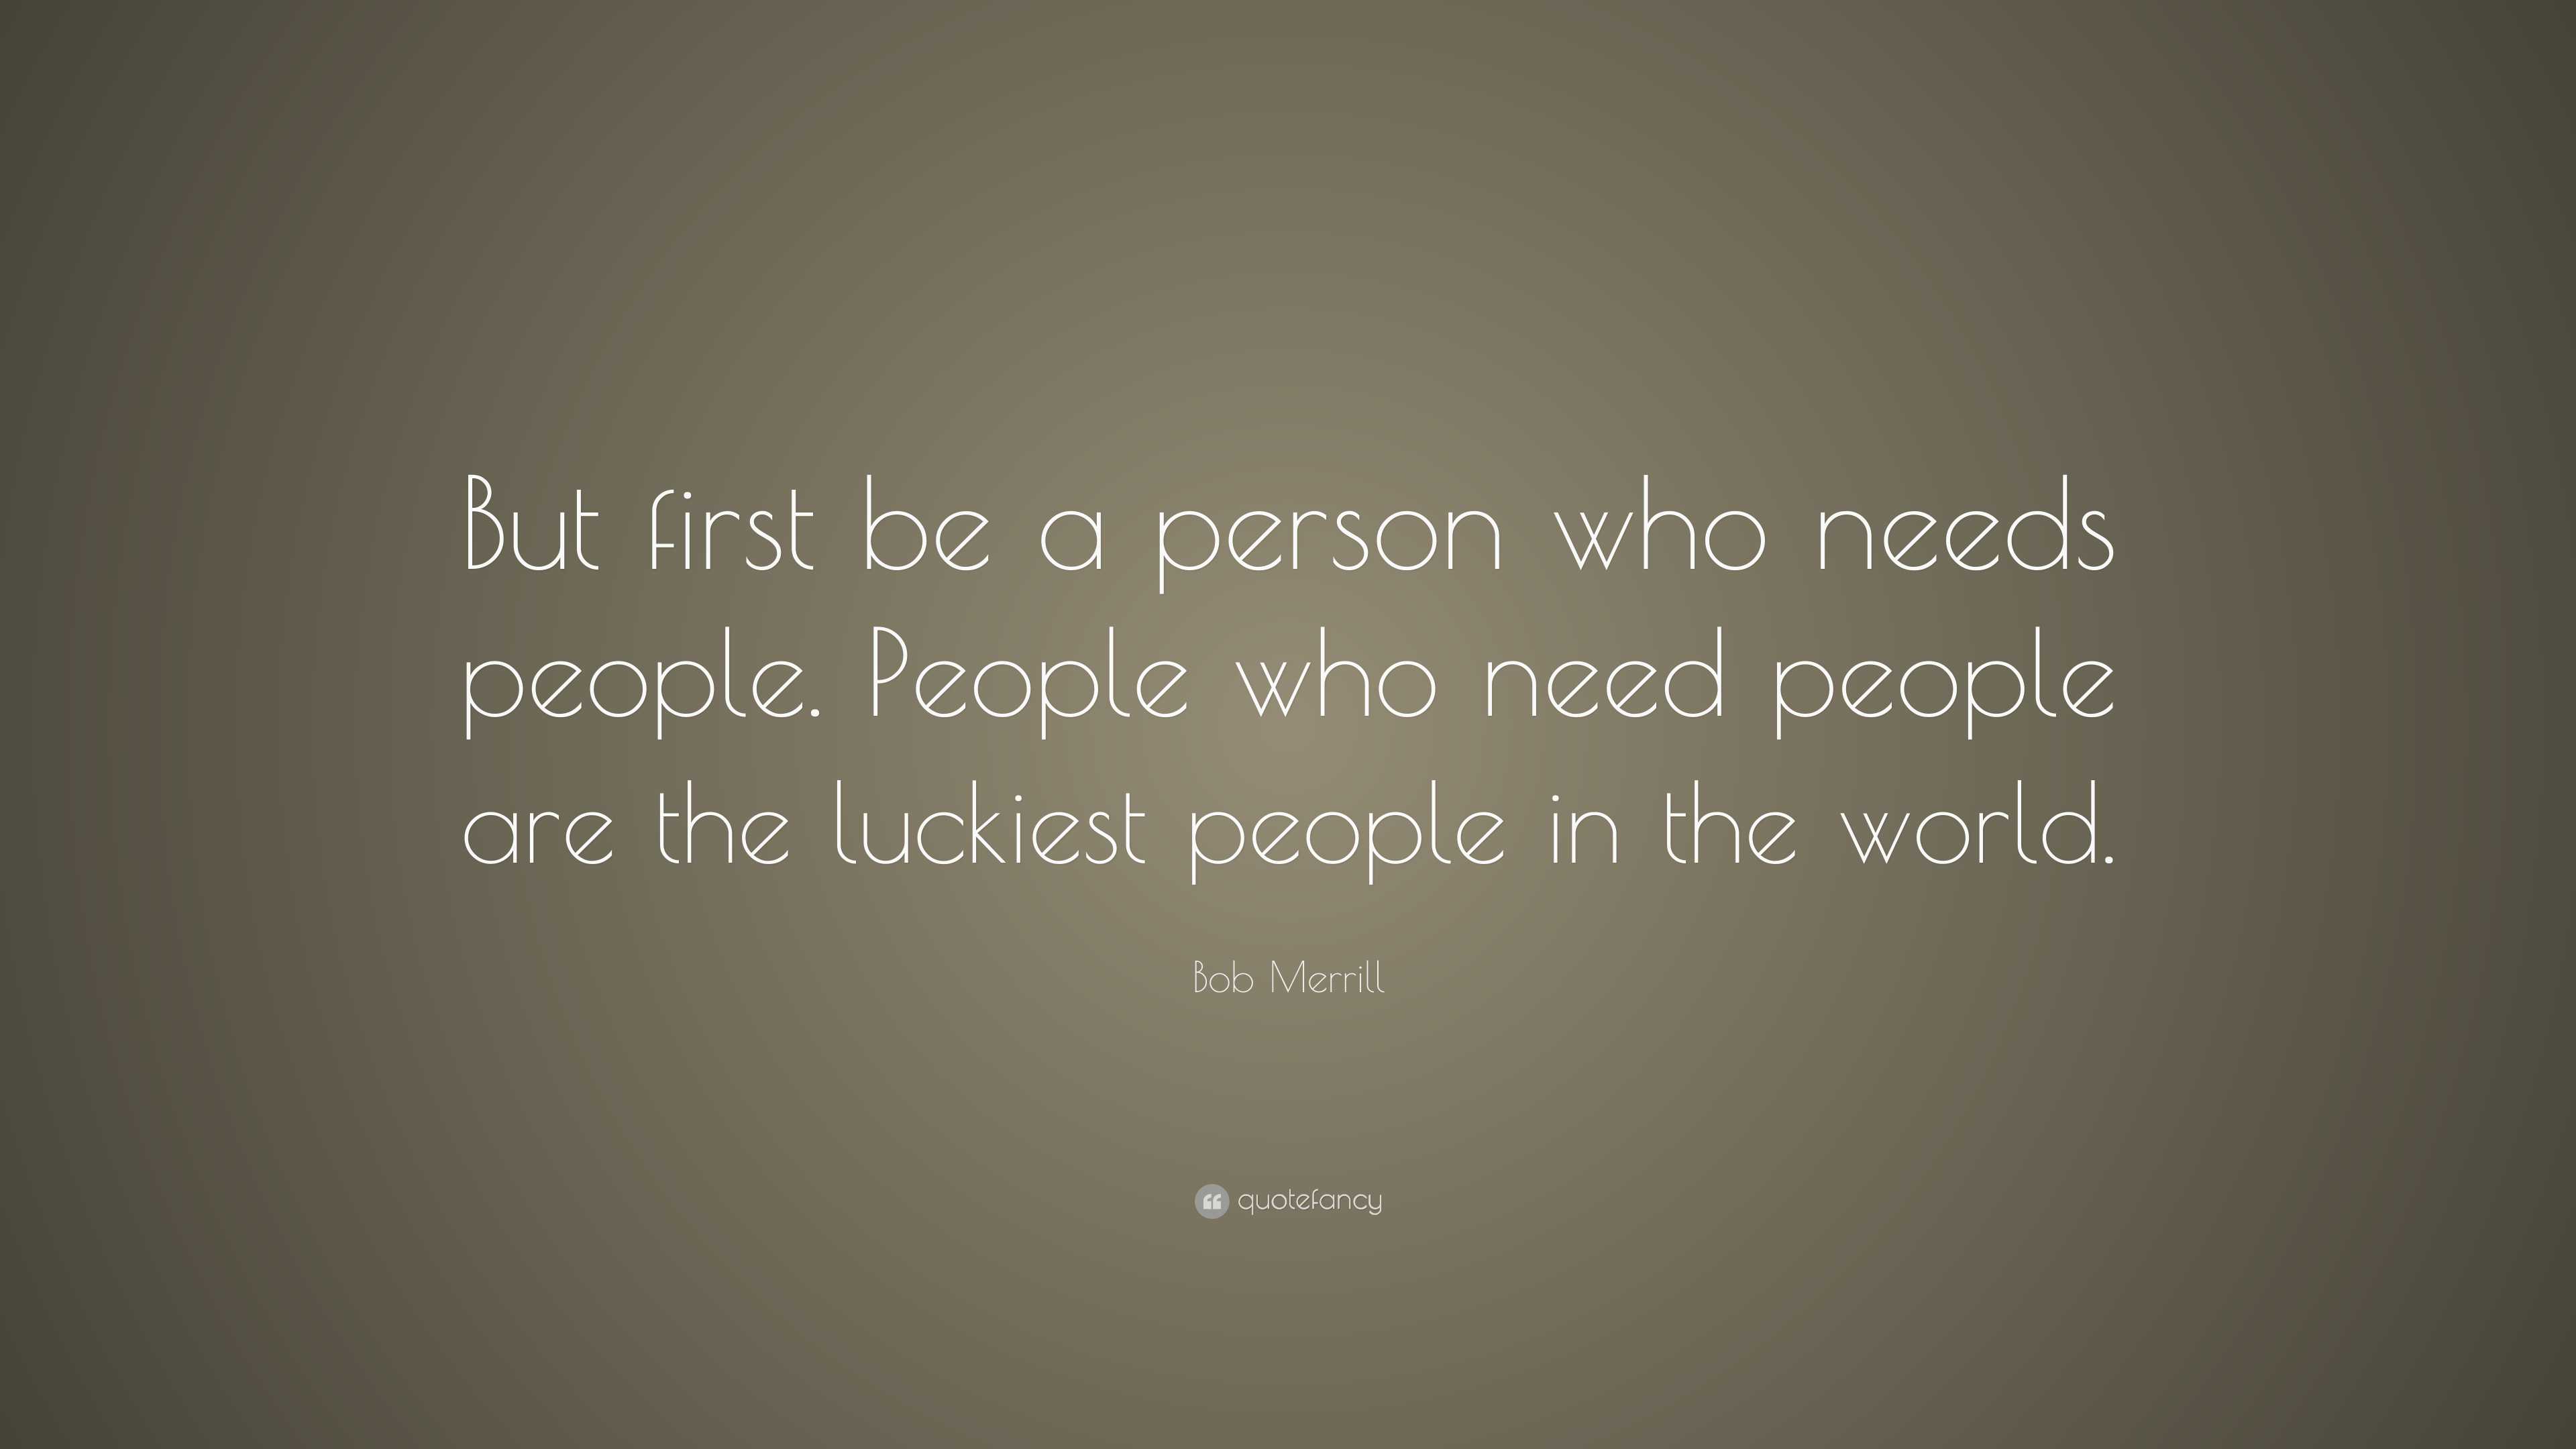 Bob Merrill Quote: “But first be a person who needs people. People who ...